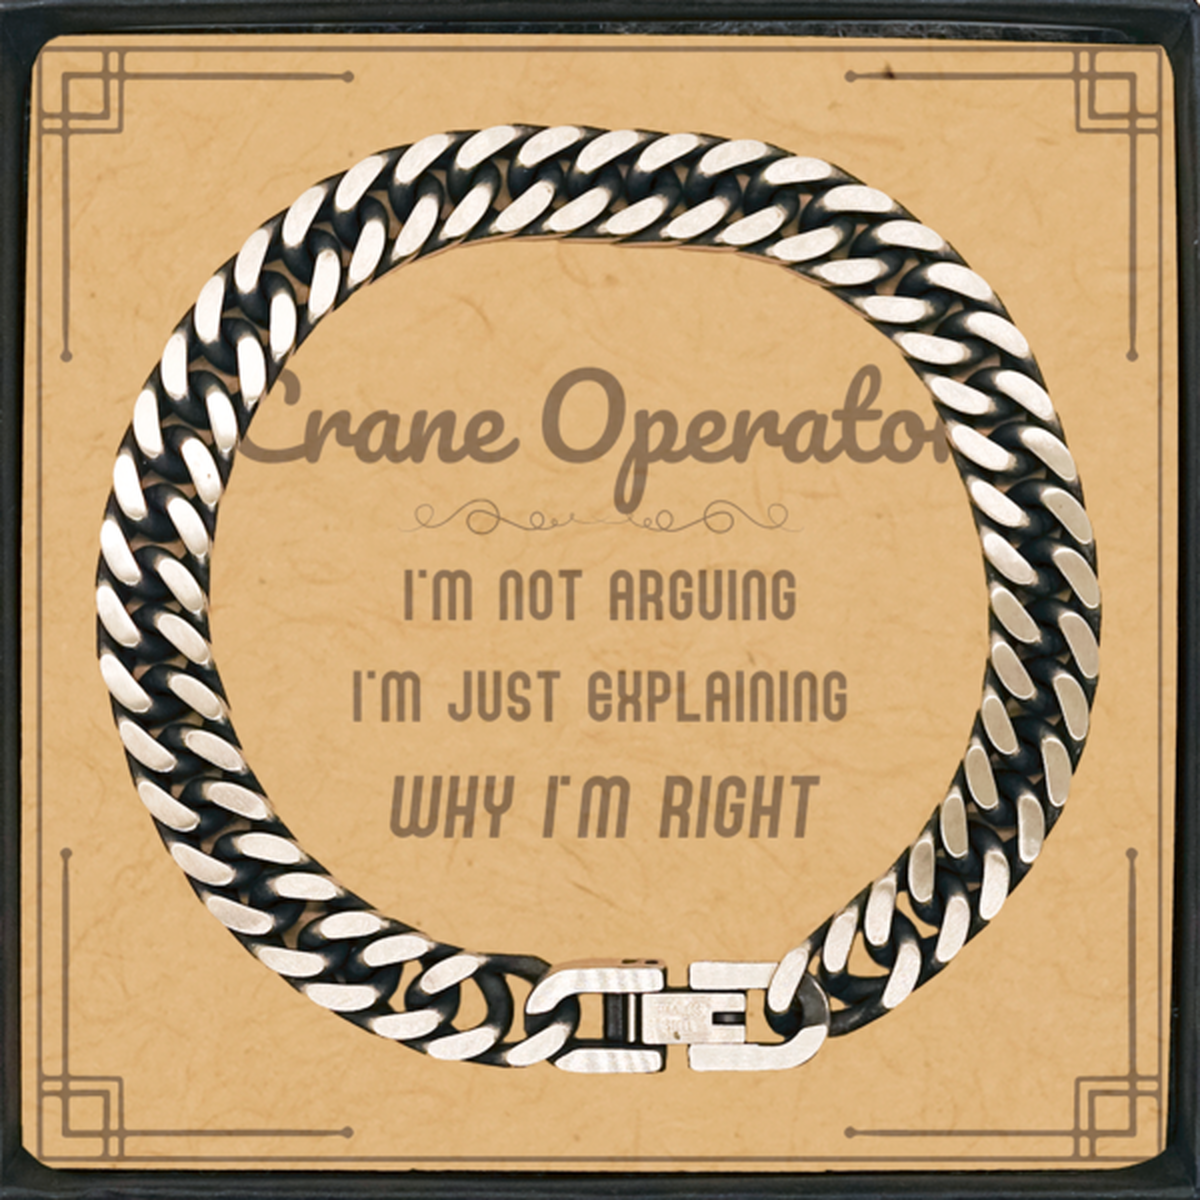 Crane Operator I'm not Arguing. I'm Just Explaining Why I'm RIGHT Cuban Link Chain Bracelet, Funny Saying Quote Crane Operator Gifts For Crane Operator Message Card Graduation Birthday Christmas Gifts for Men Women Coworker